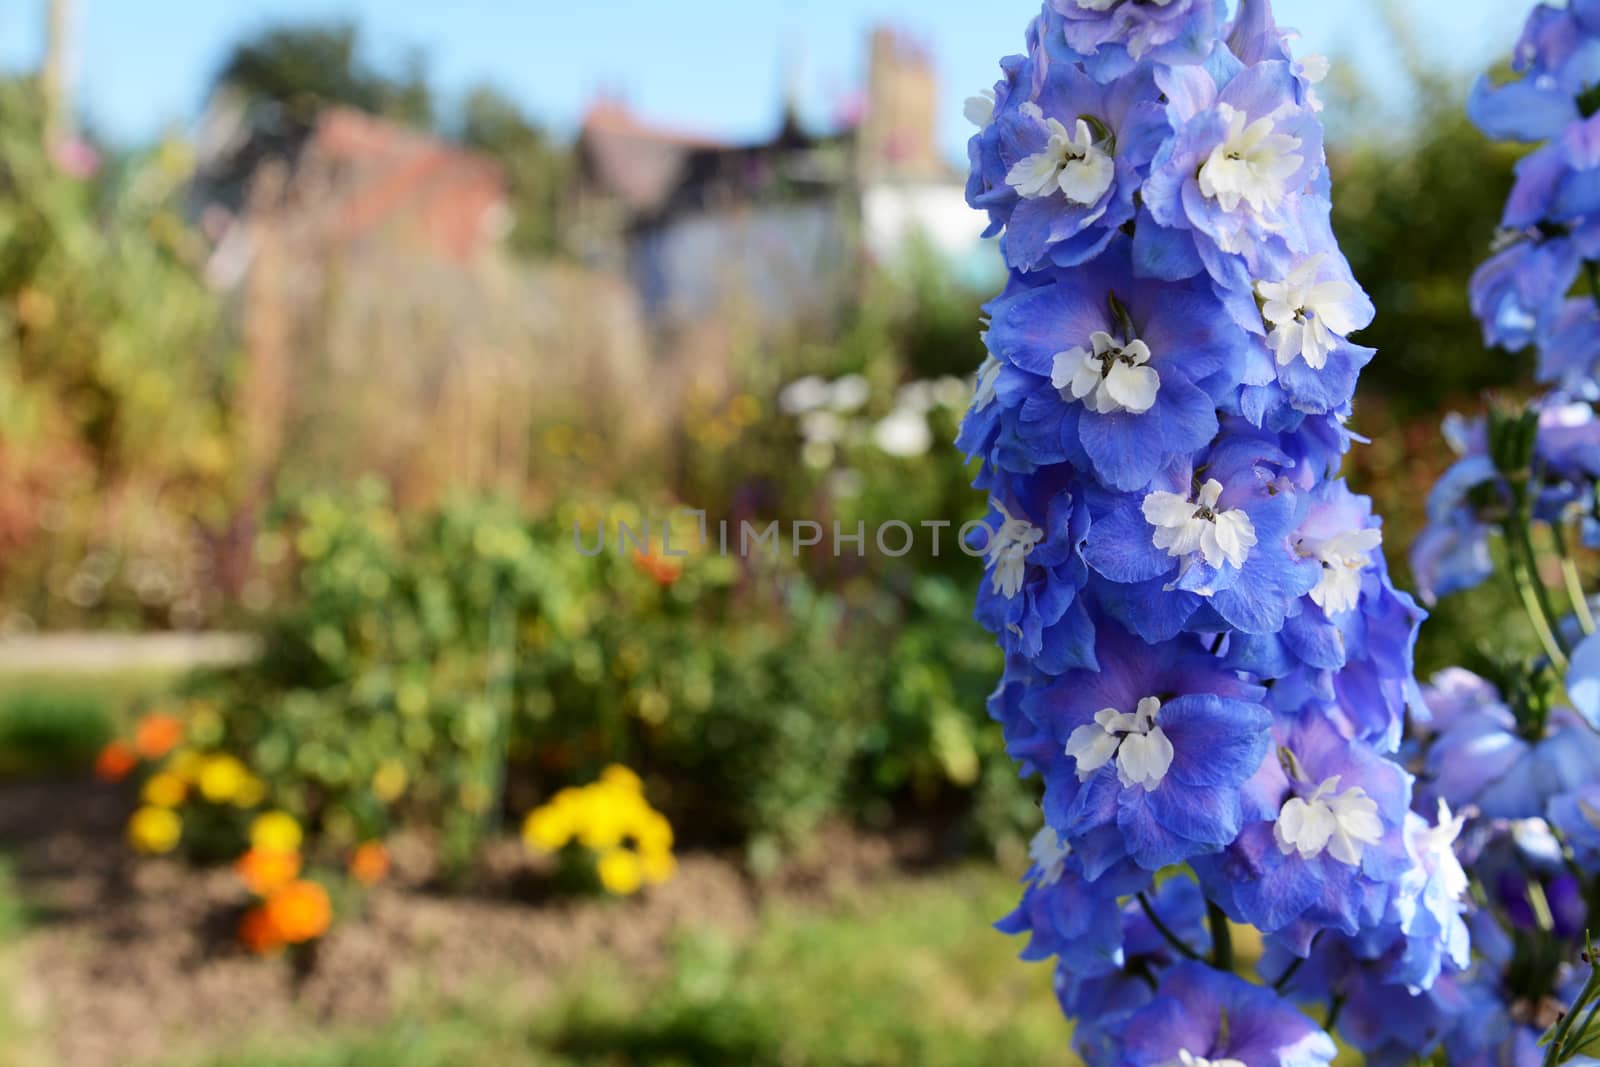 Blue delphinium blooms with white centres in a sunny garden by sarahdoow